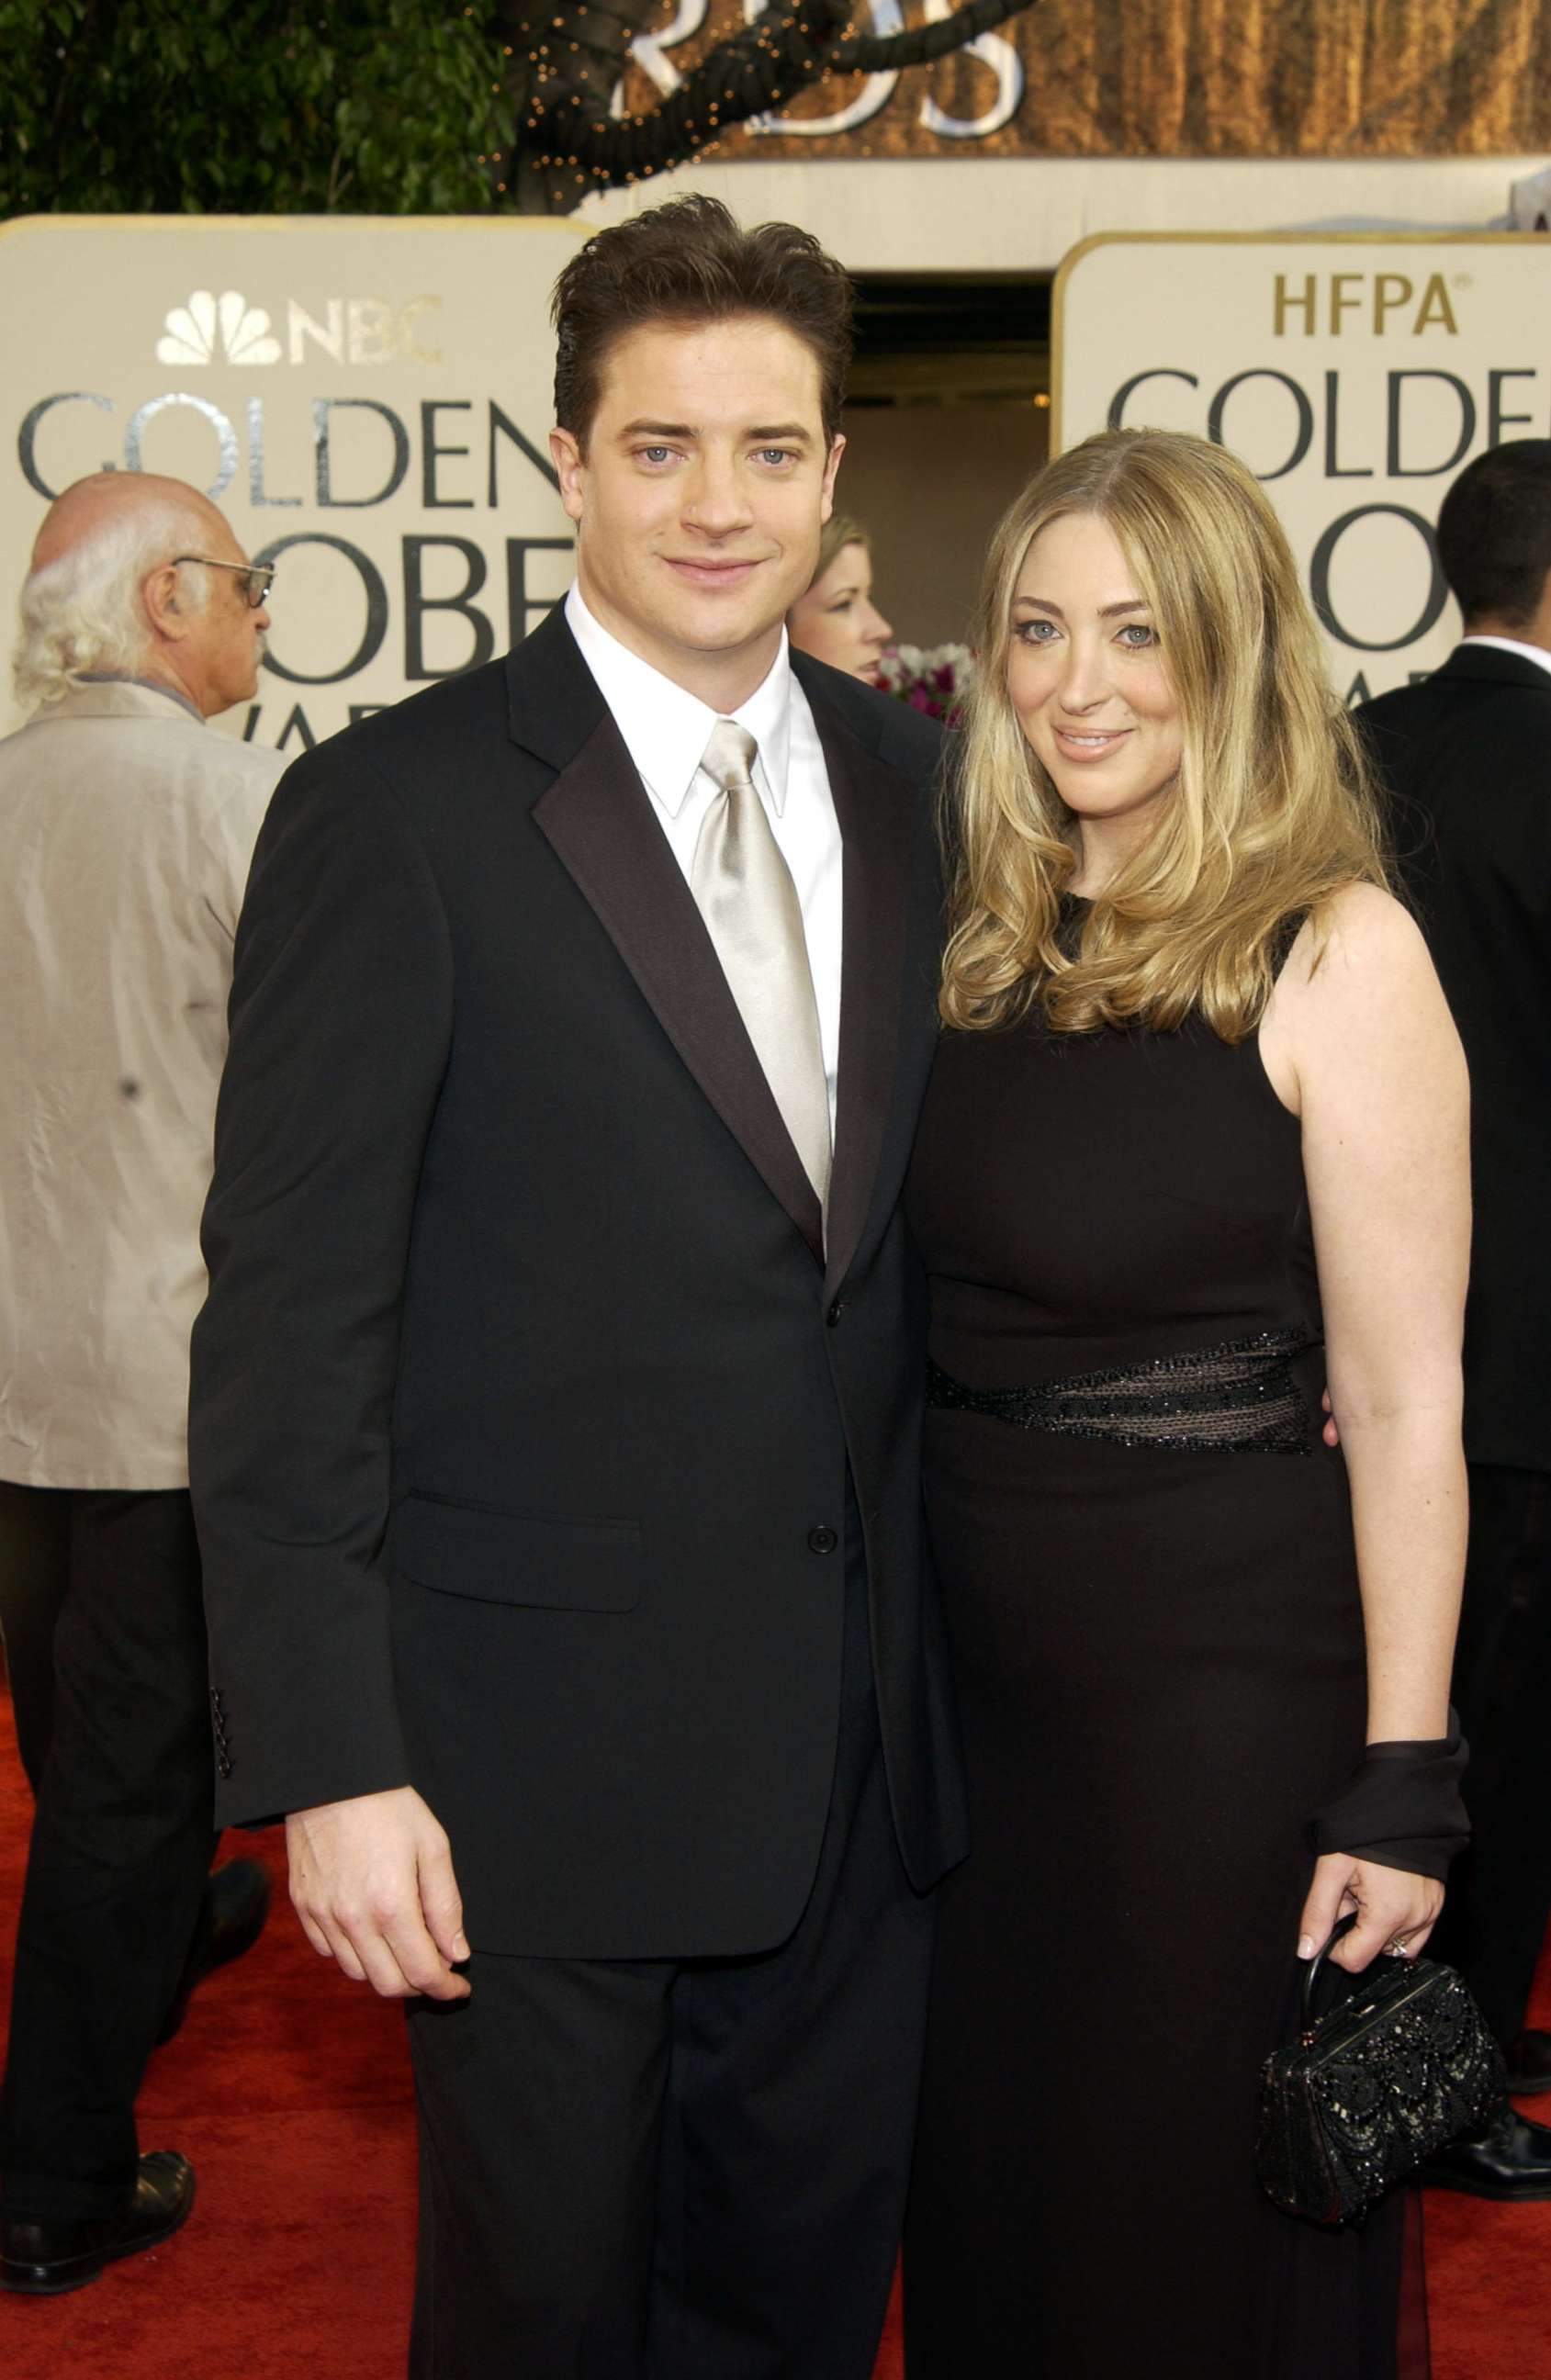 PHOTO: Brendan Fraser and Afton Smith arrive for the 60th annual Golden Globe awards at the Beverly Hilton Hotel, Jan. 19, 2003, in Beverly Hills, Calif.